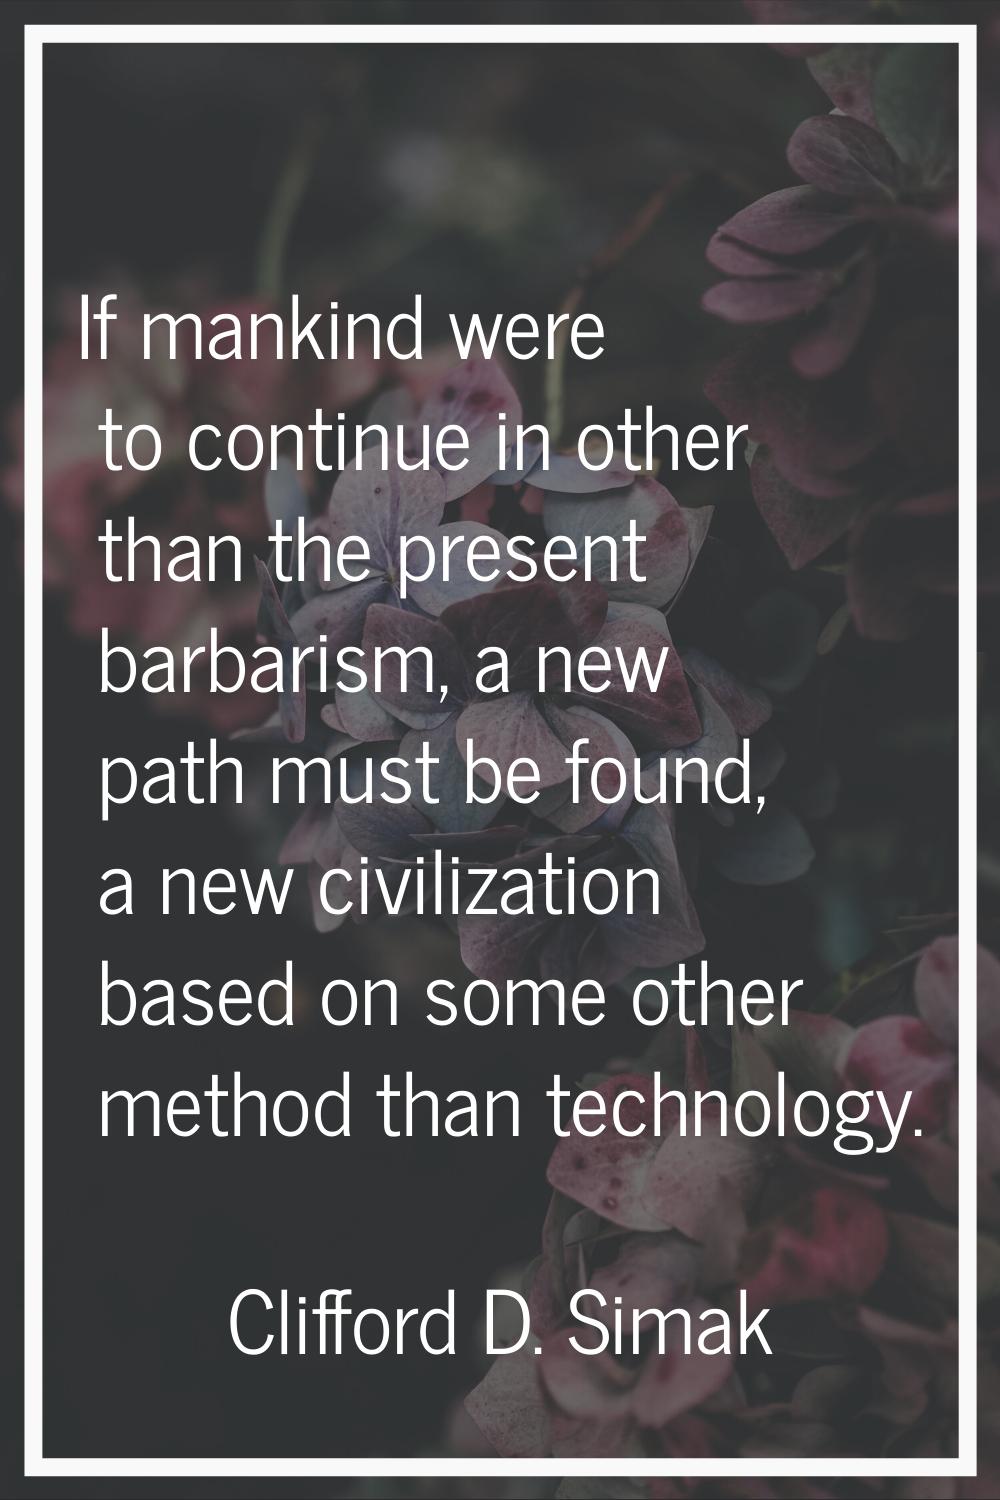 If mankind were to continue in other than the present barbarism, a new path must be found, a new ci